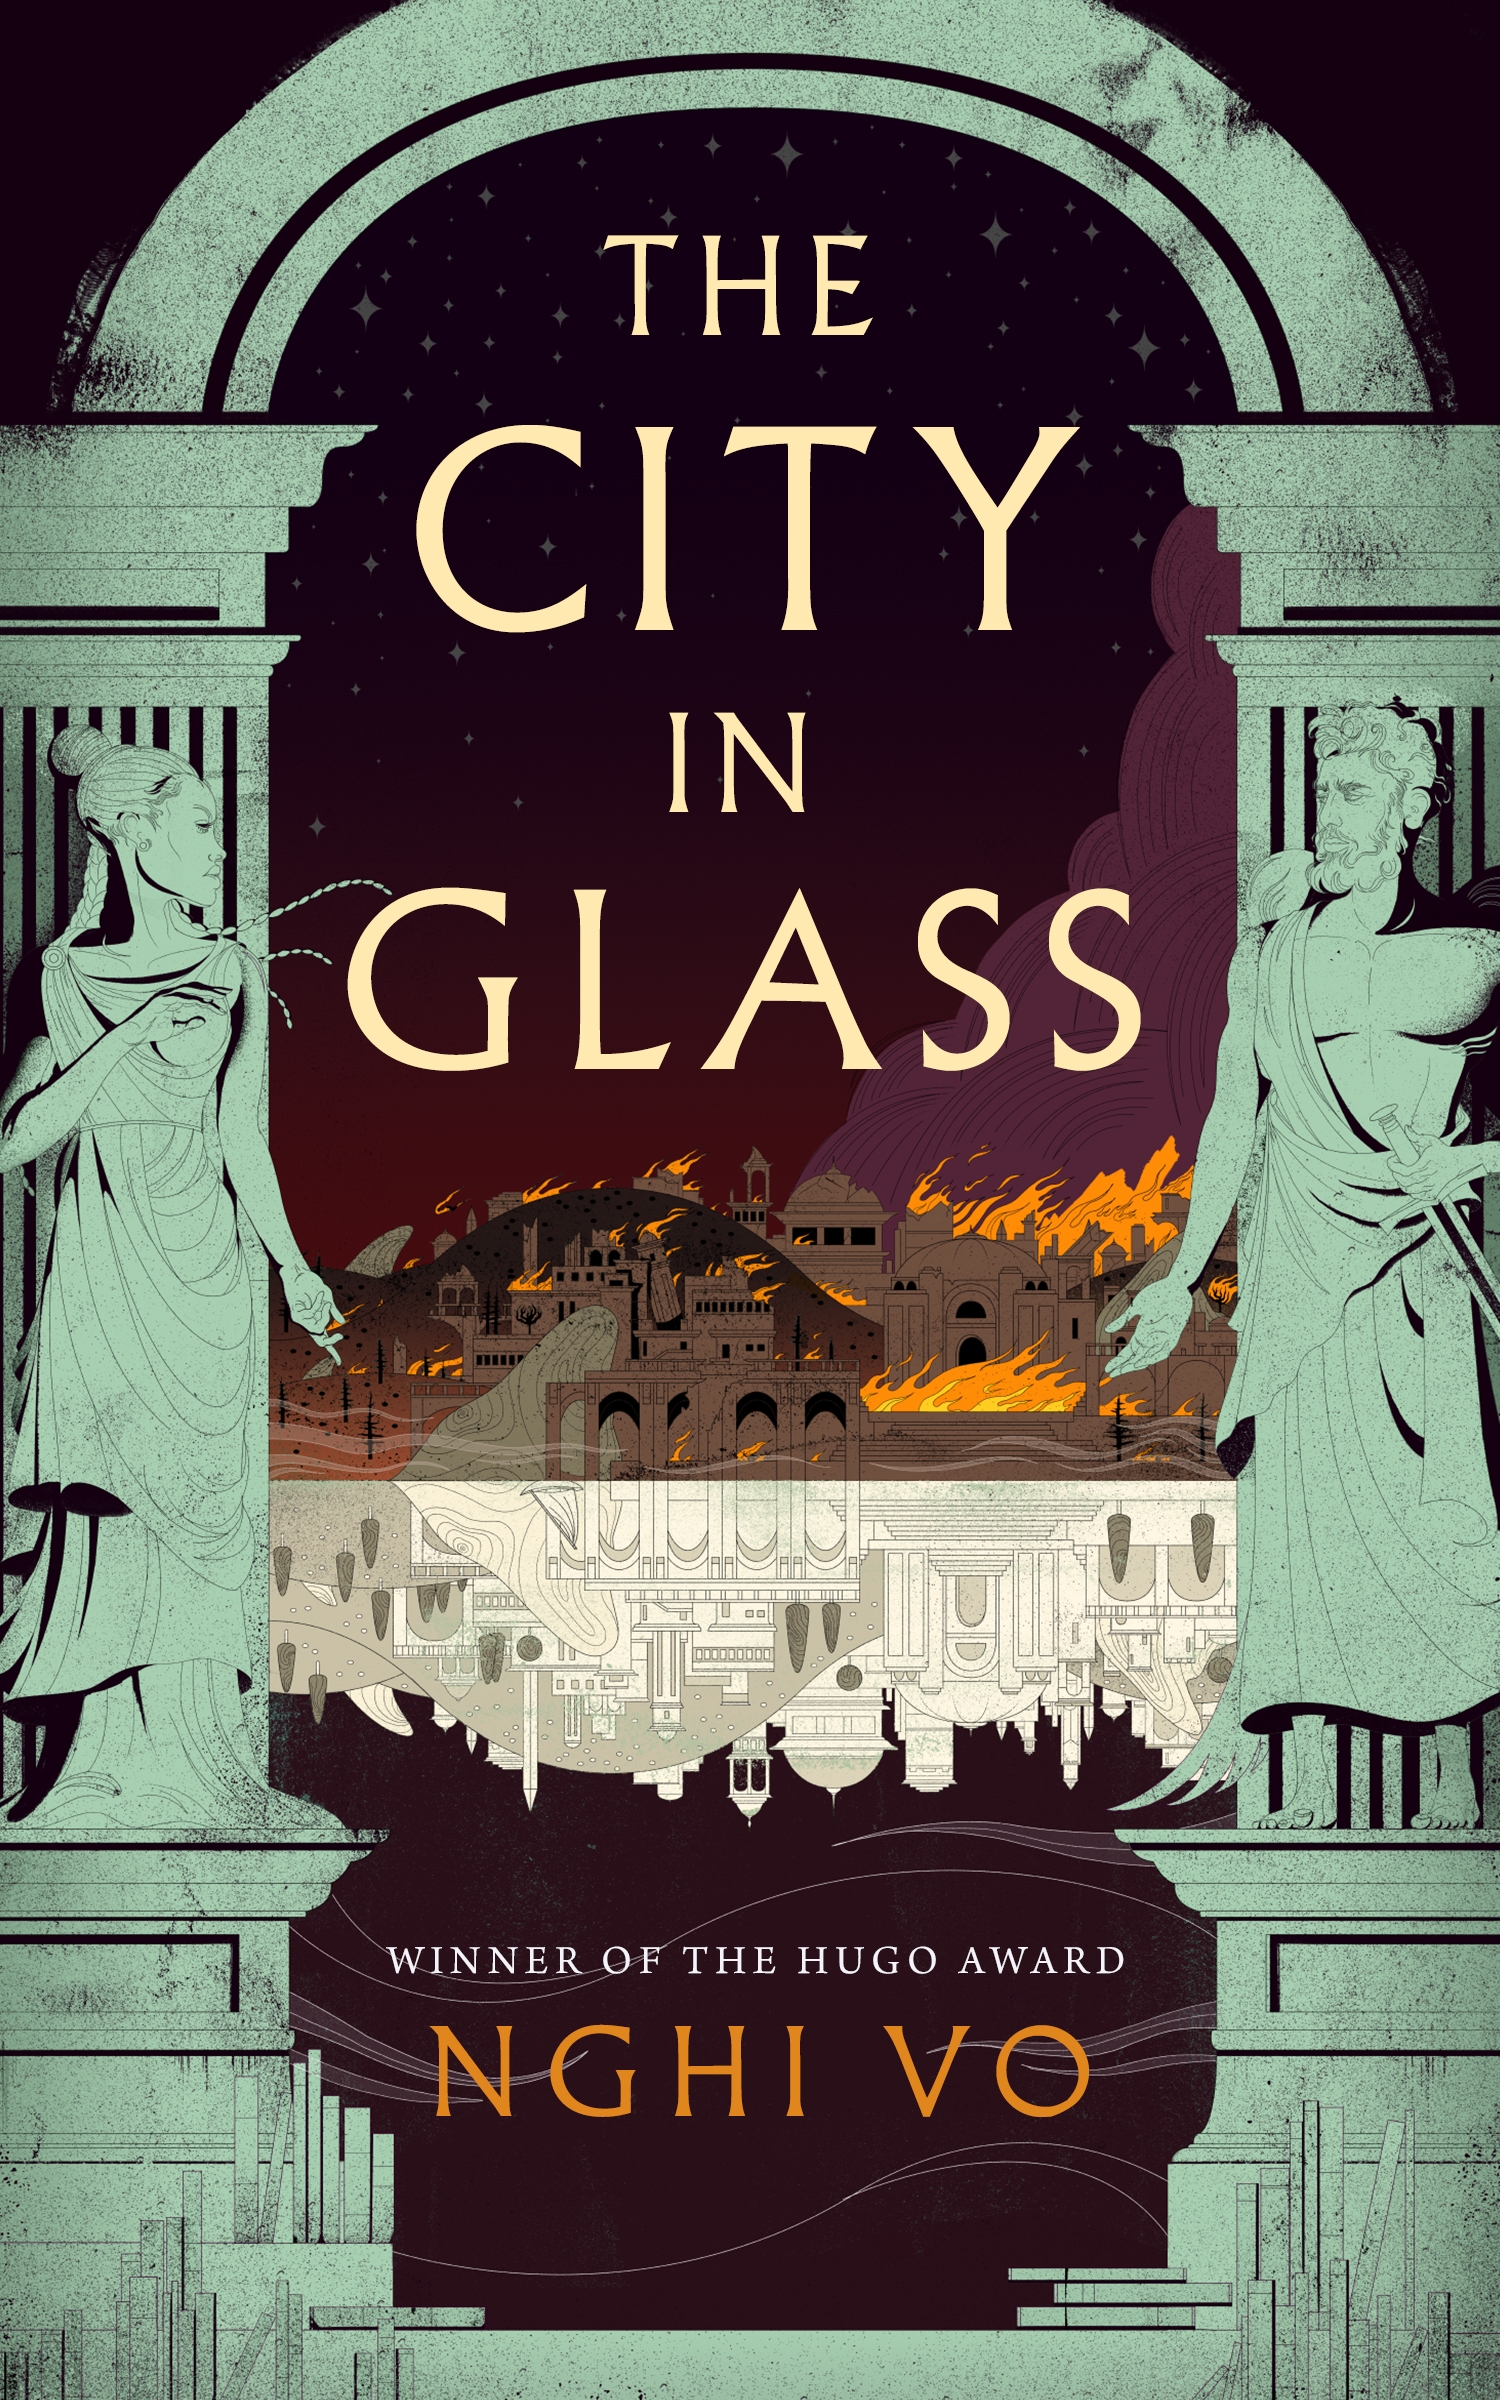 The City in Glass by Nghi Vo